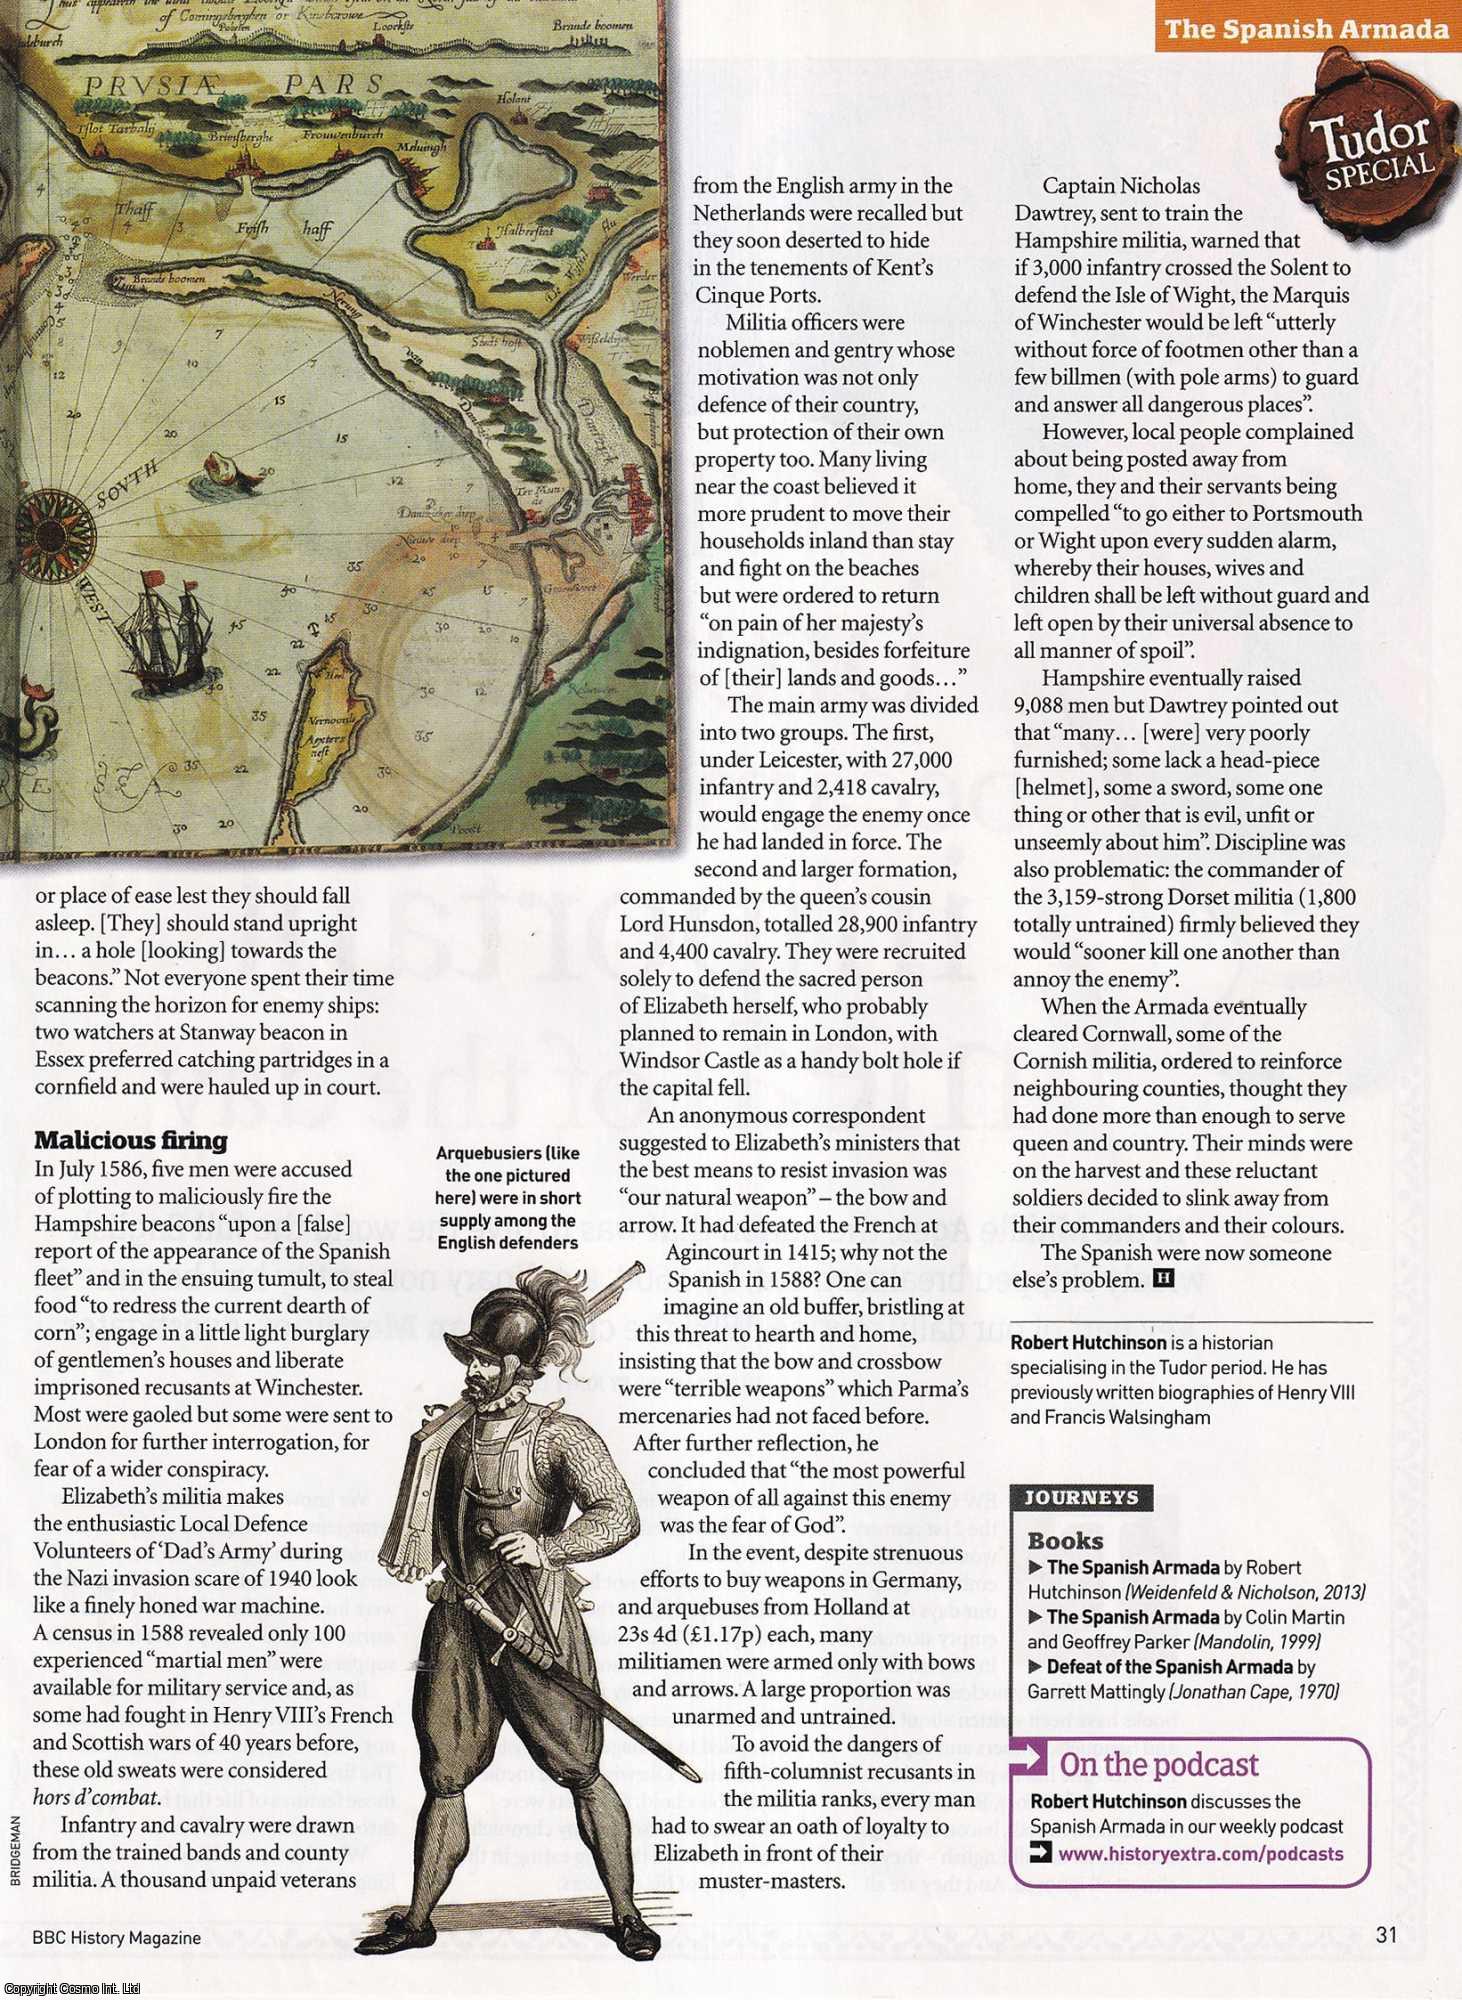 Robert Hutchinson - England's Lucky Escape: Tudor England, Poorly Prepared for Foreign Invaders and the Spanish Armada in 1588. An original article from BBC History Magazine, 2013.